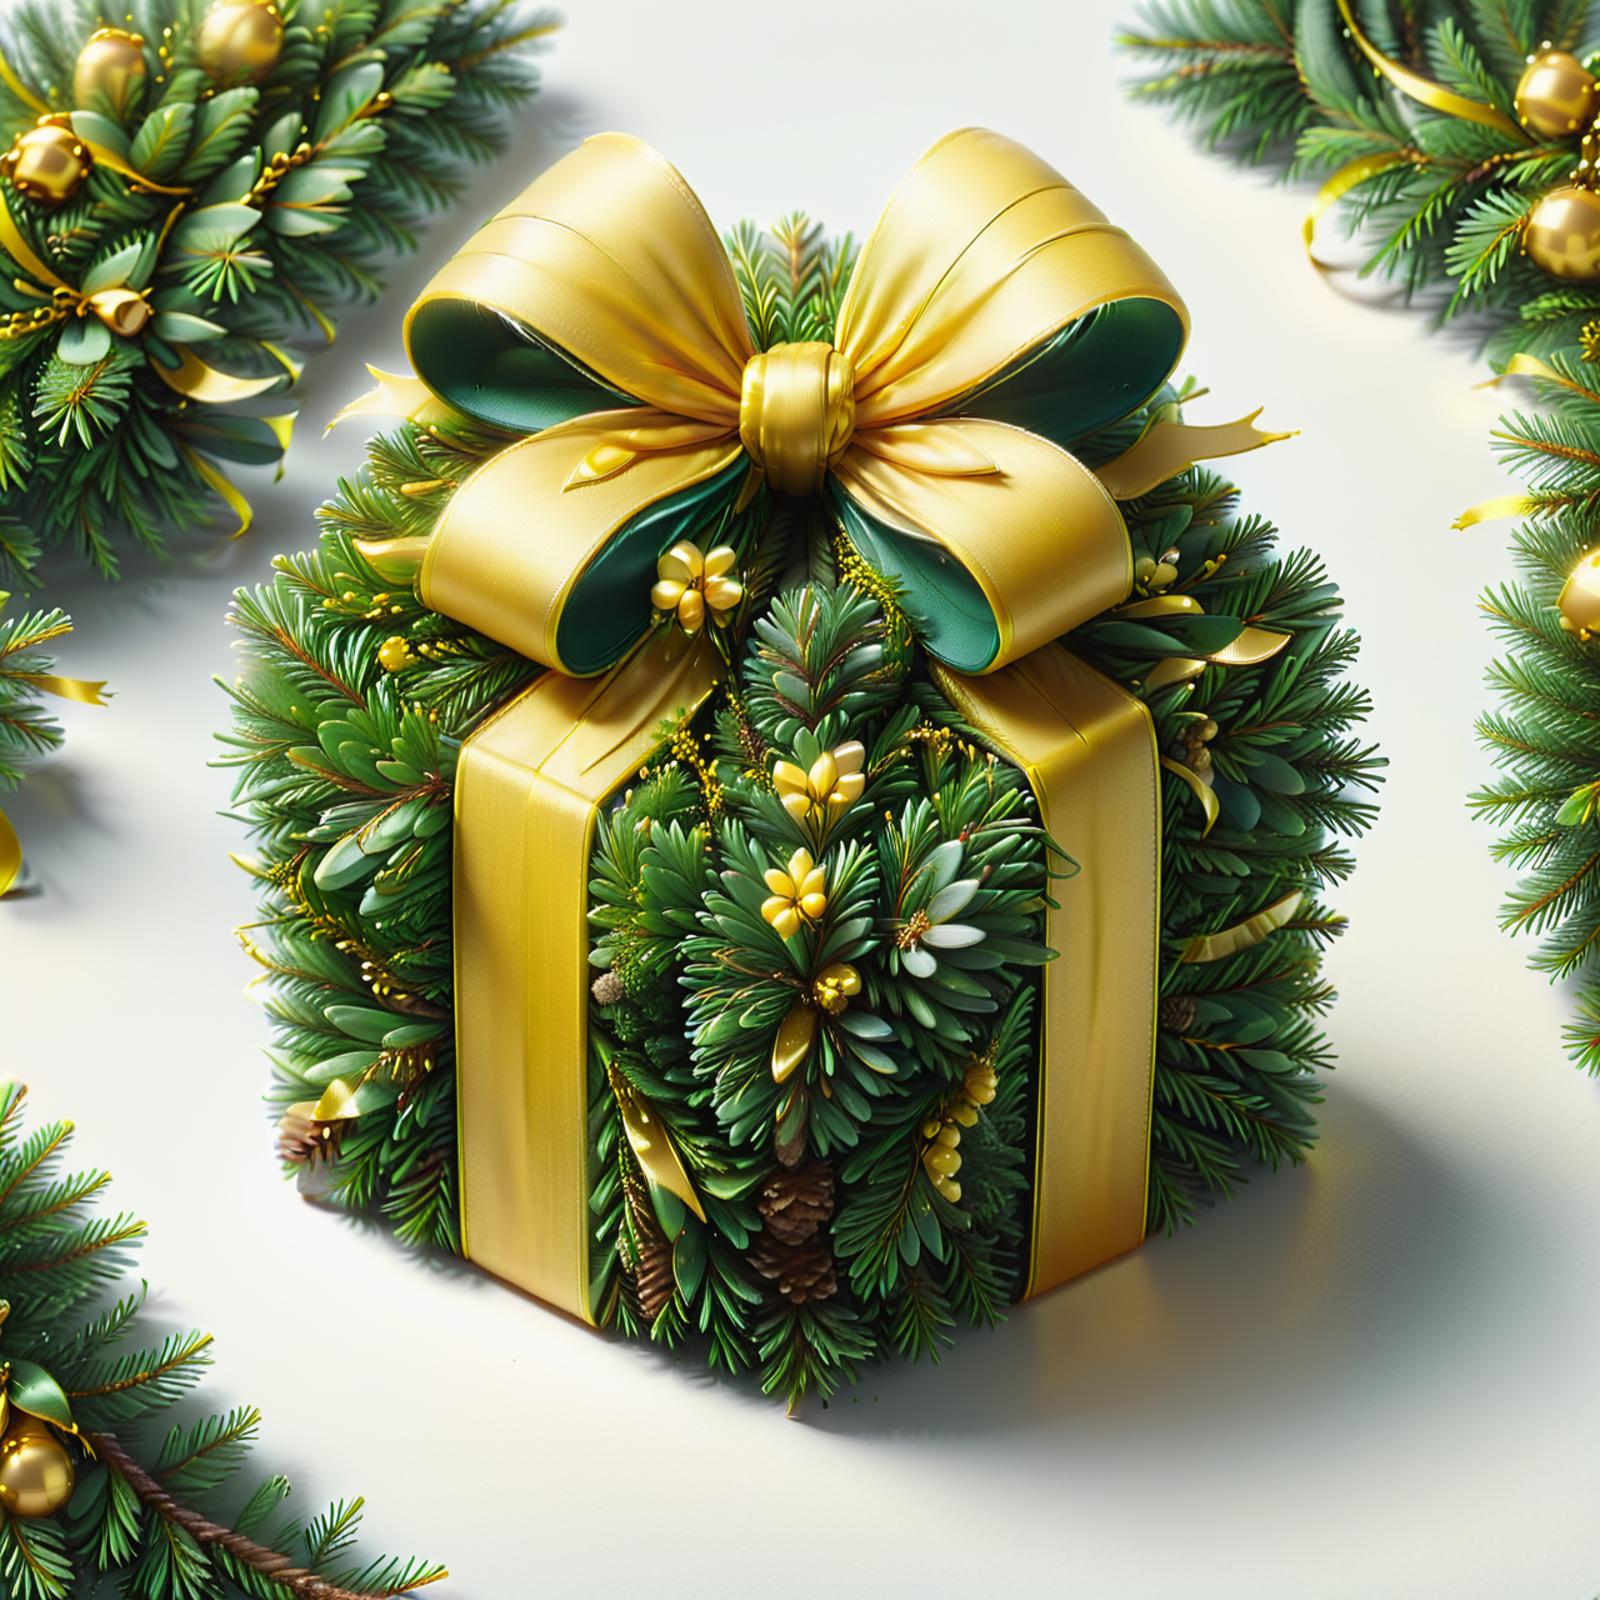 A beautifully wrapped gold and green ornamental gift with a bow.